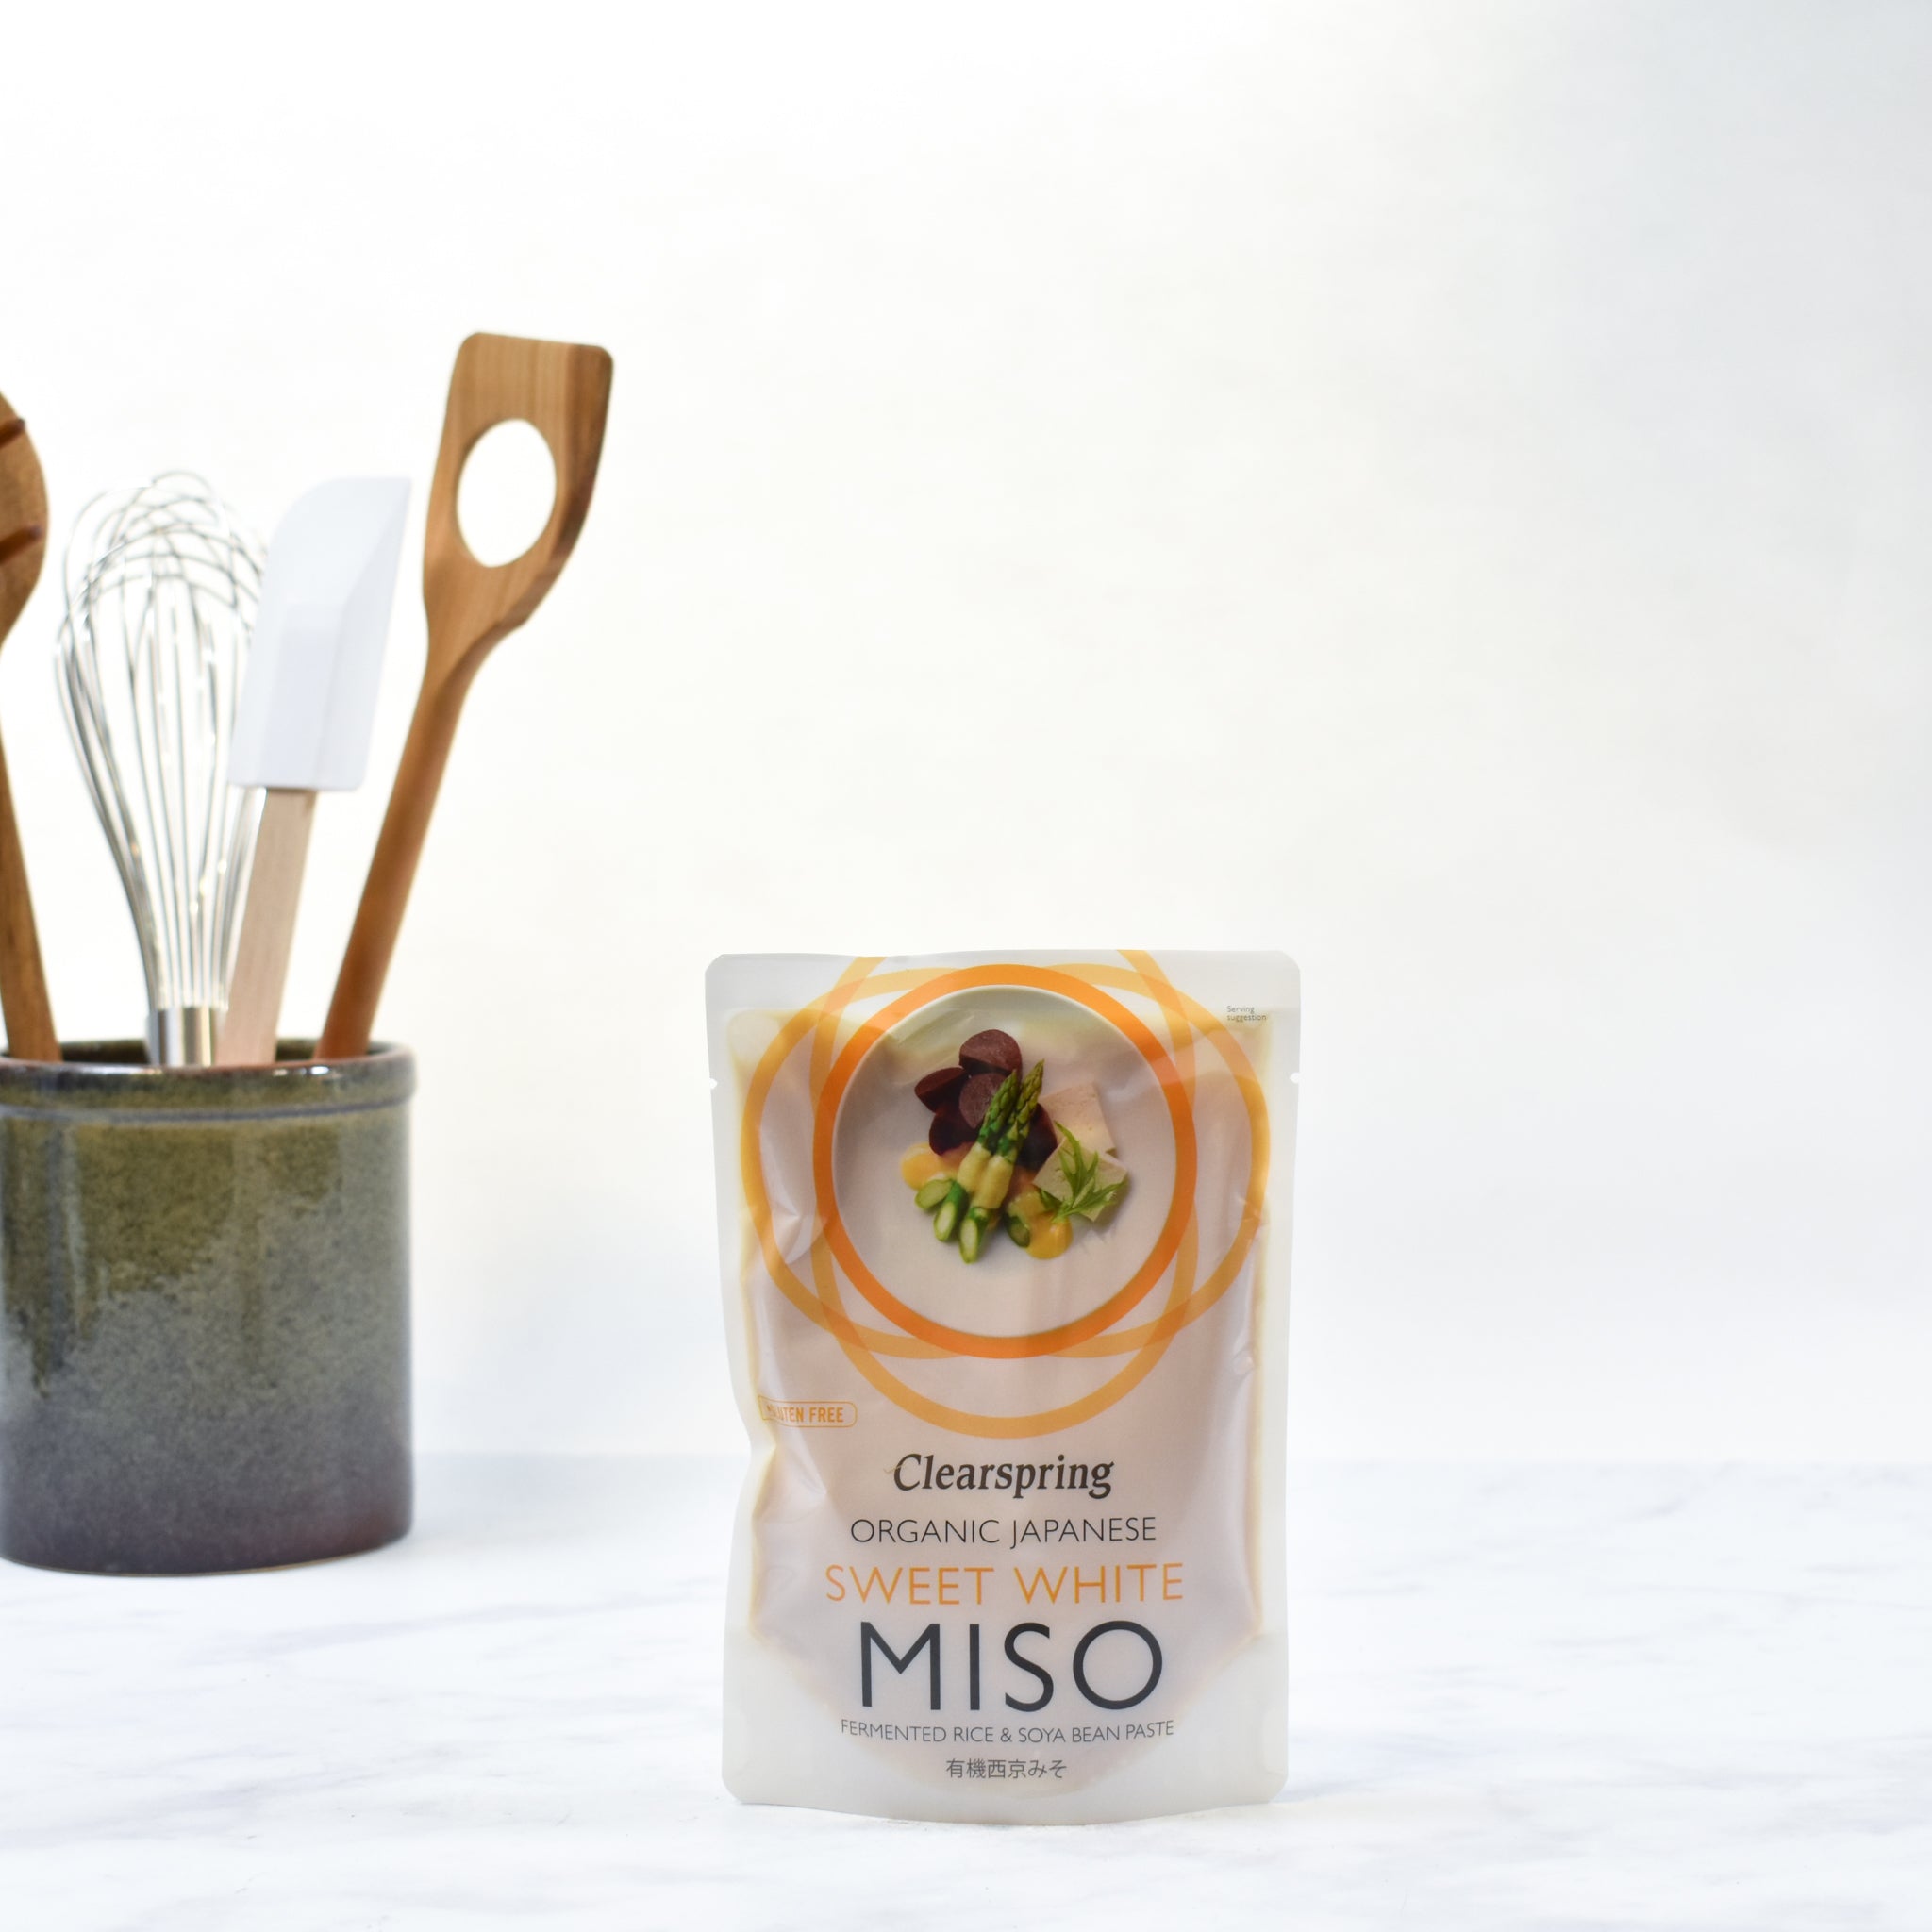 Clearspring Organic Sweet White Miso, 250g